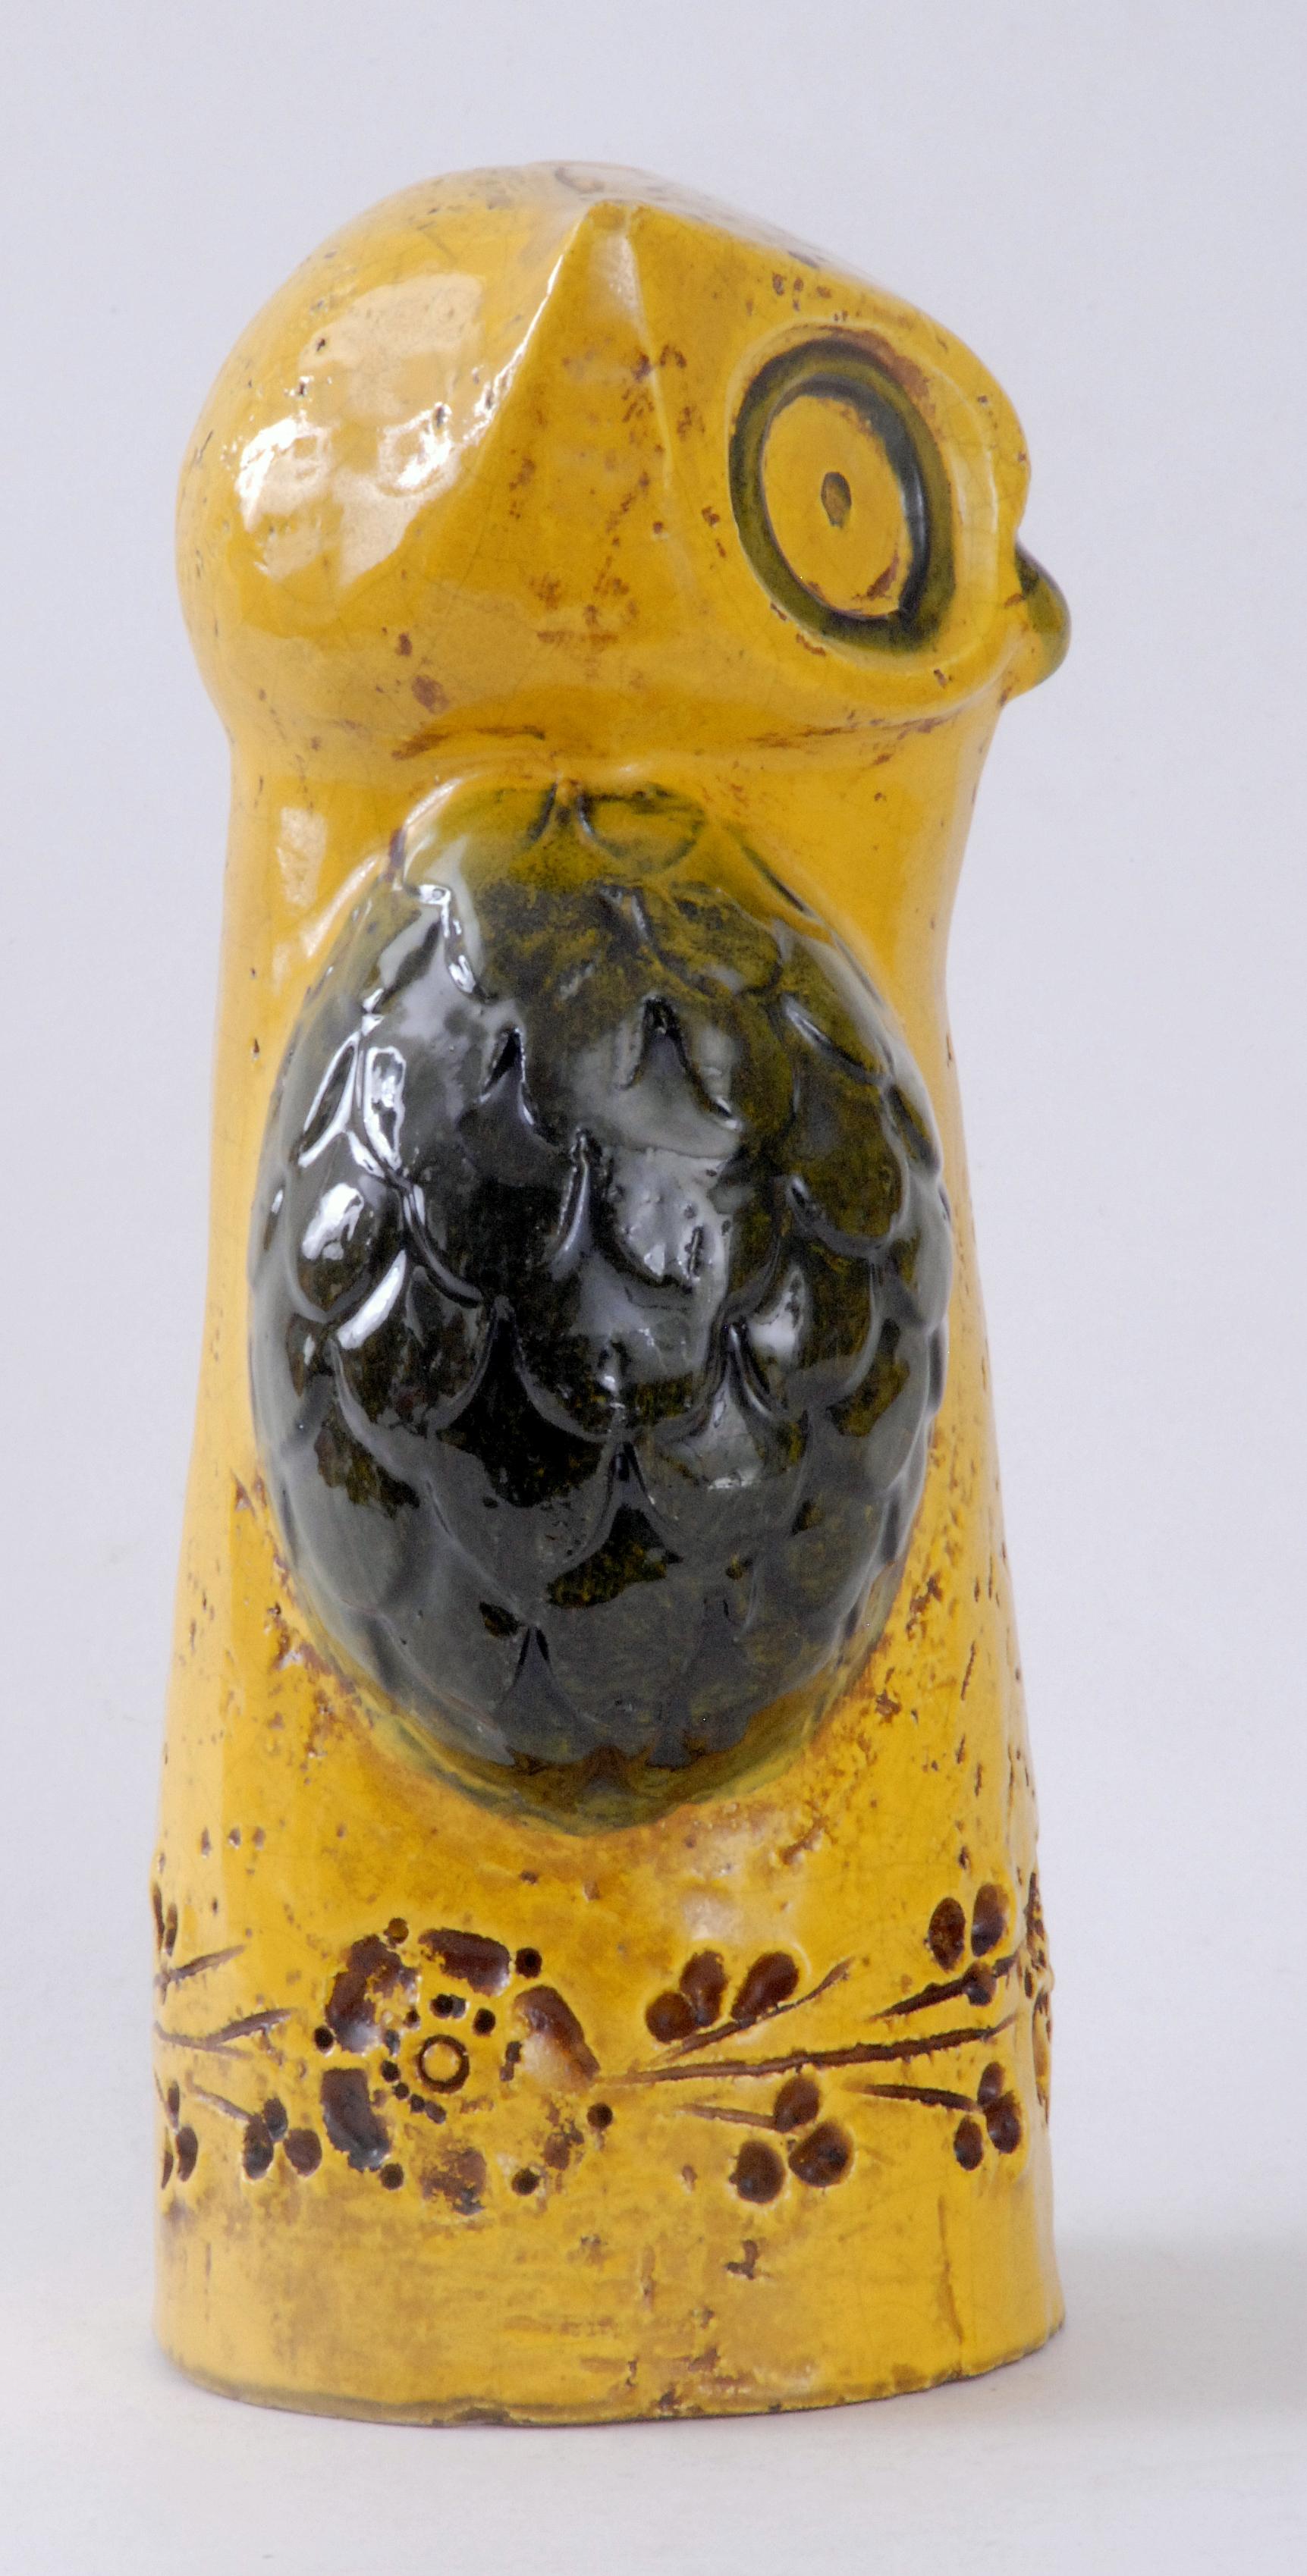 A yellow owl designed by Aldo Londi in the 1960s with impressed stylized flower motifs around the bottom.
Retains the Rosenthal Netter label inside the base.